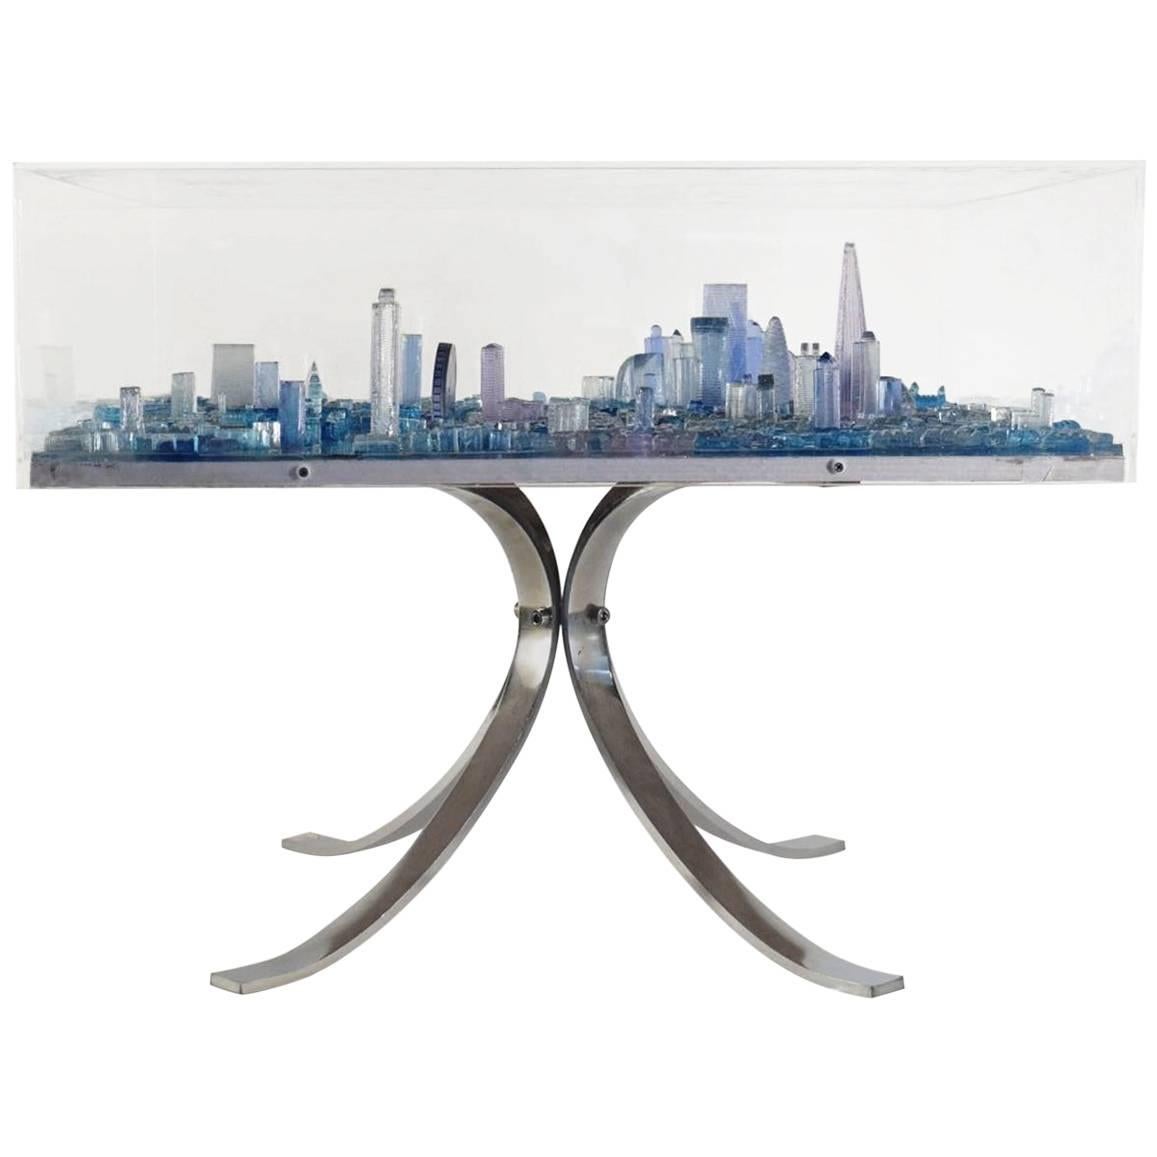 Fabulous London Coffee or Side Table by Grigoris Lagos, Molded Resin, 2015 For Sale